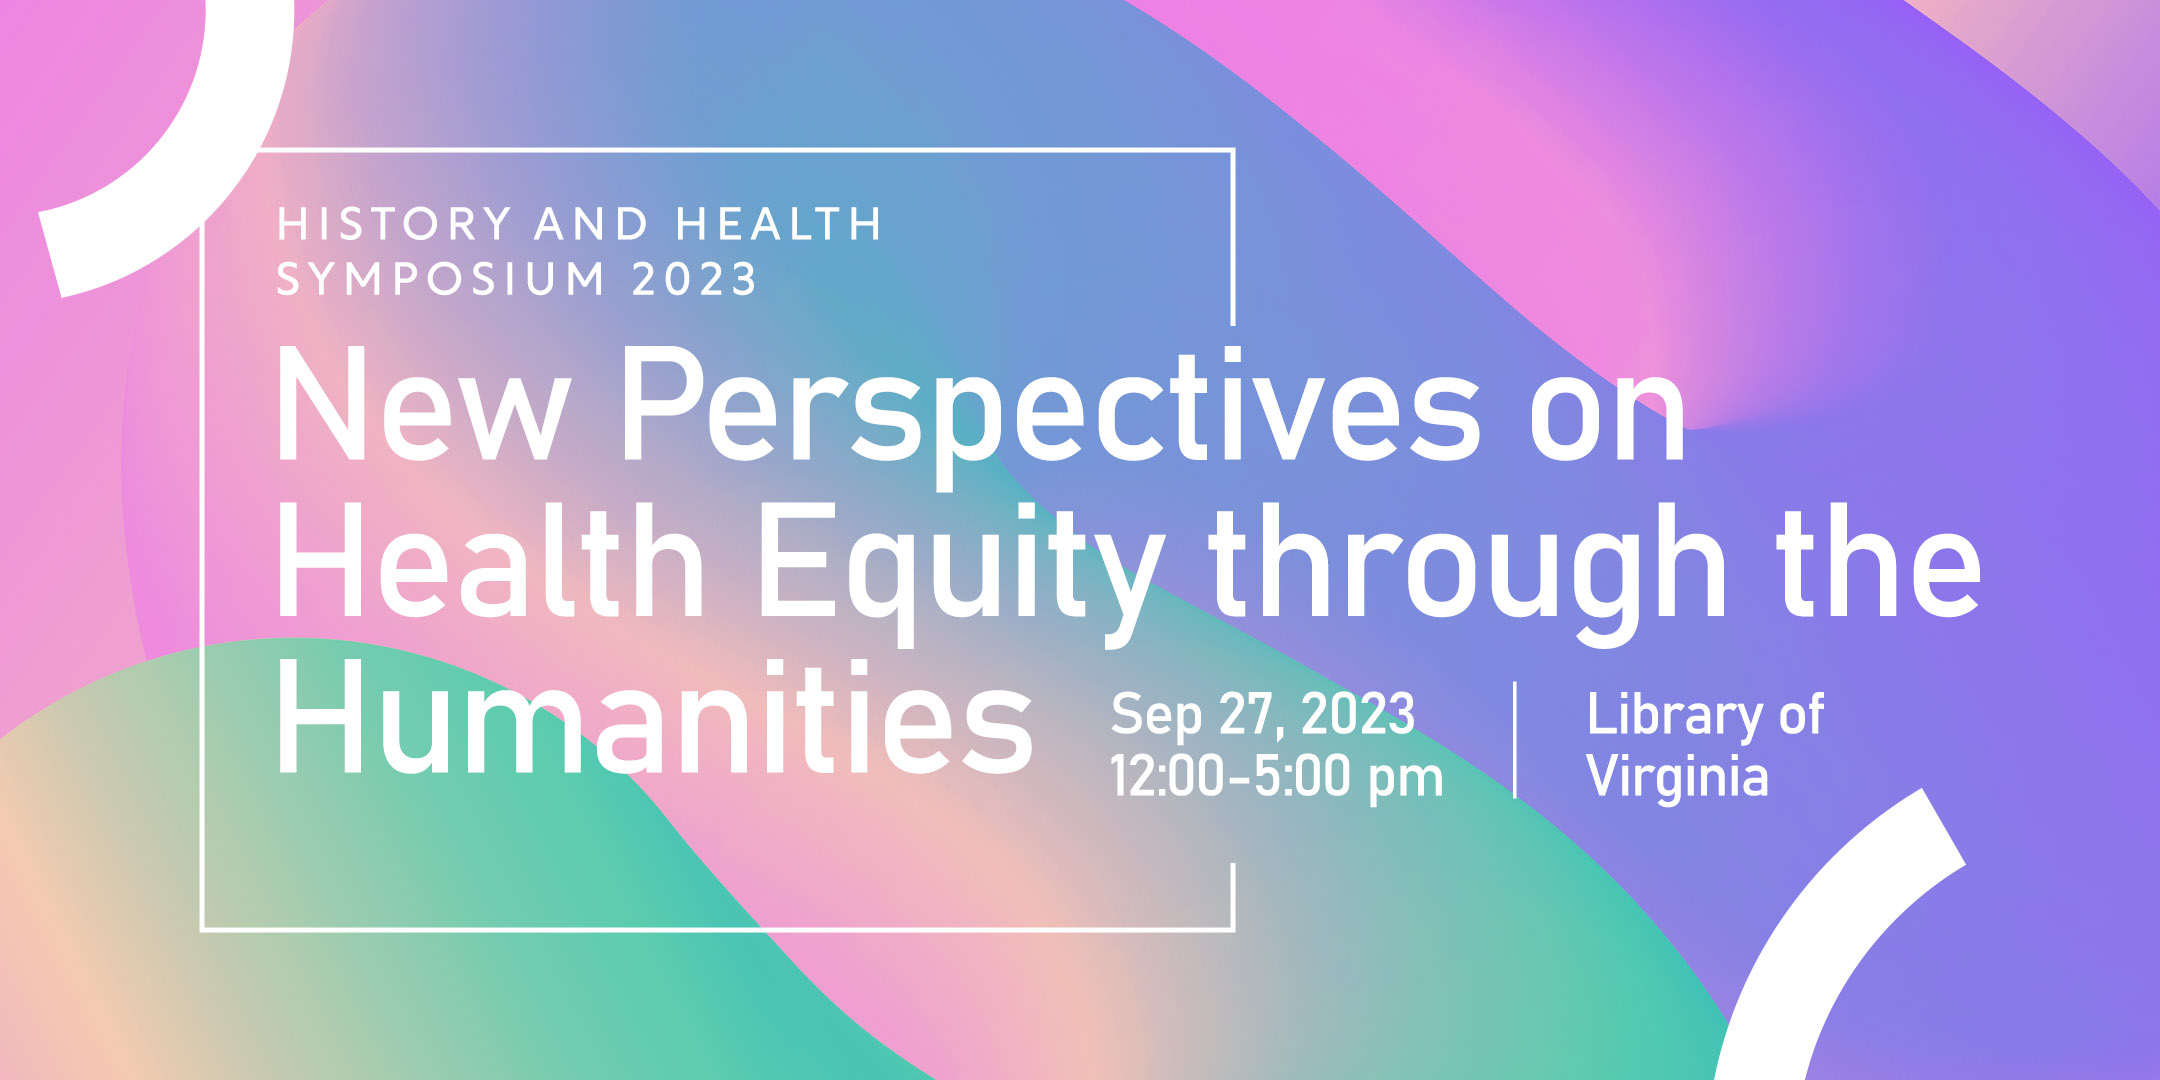 History and Health Symposium 2023 New Perspectives on Health Equity through the Humanities Sept 27 12-5pm Library of Virginia